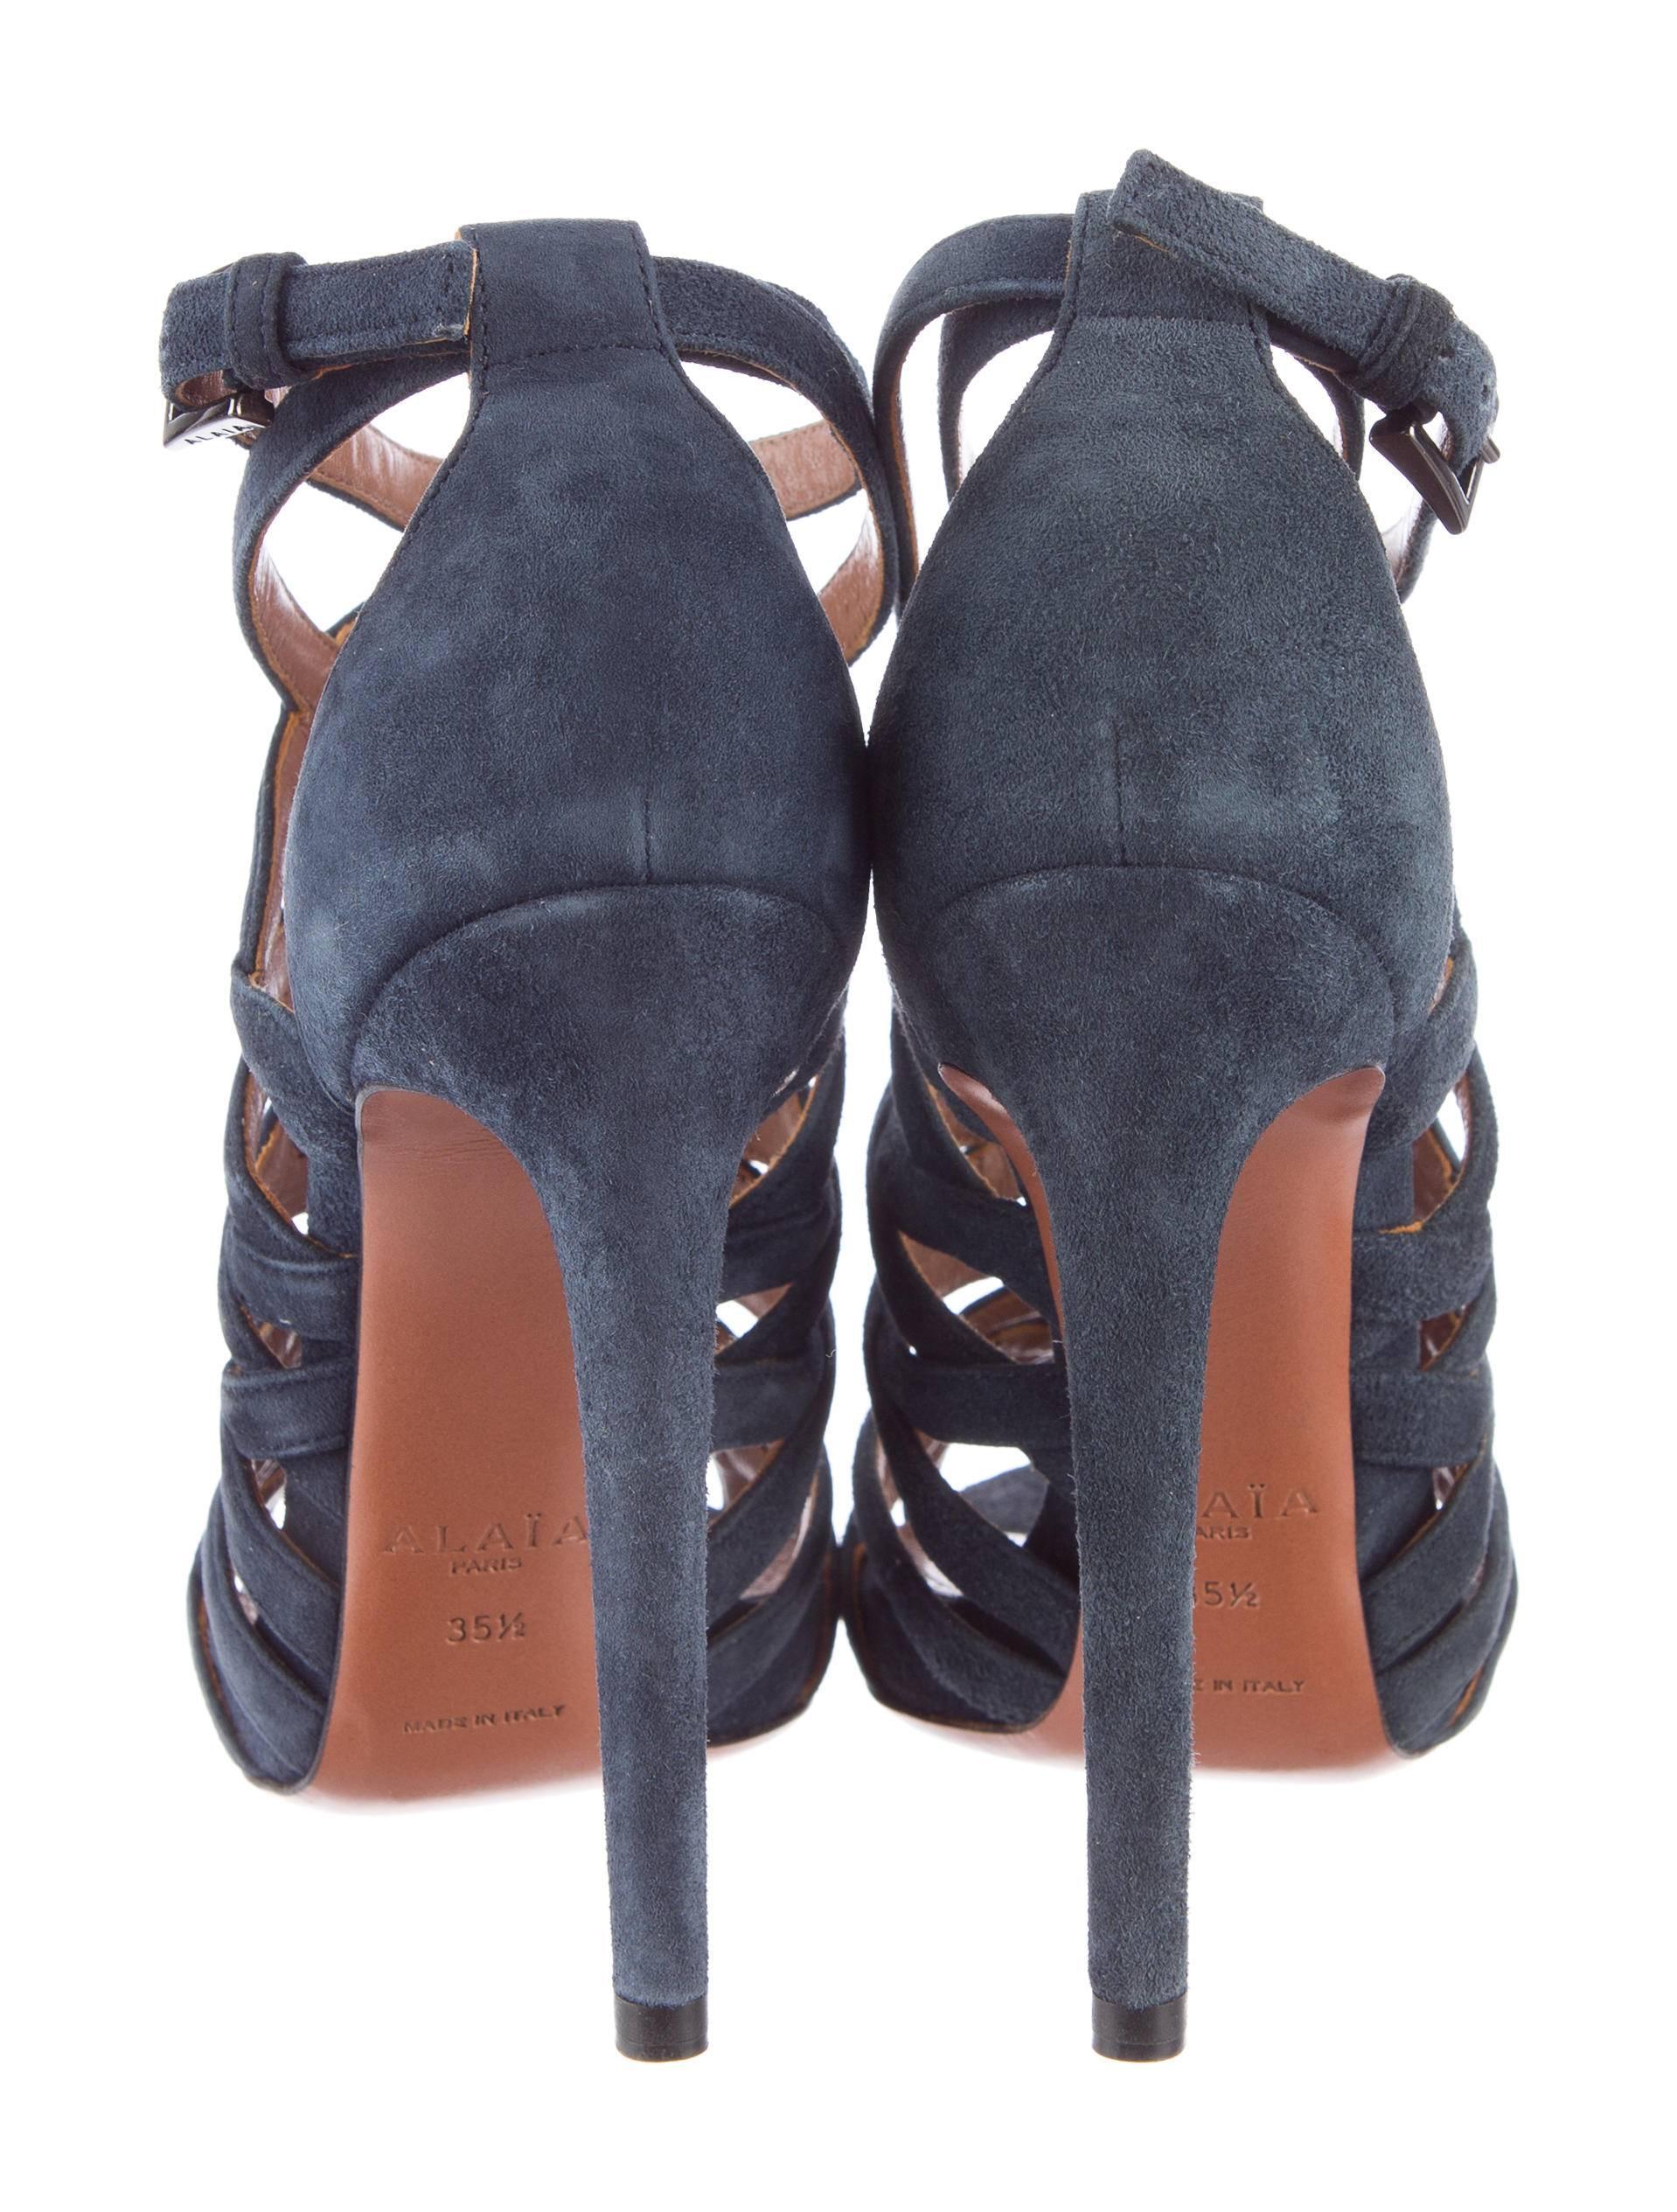 Gray Alaia NEW and SOLD OUT Blue Suede Cut Out Strappy High Heels Sandals in Box 